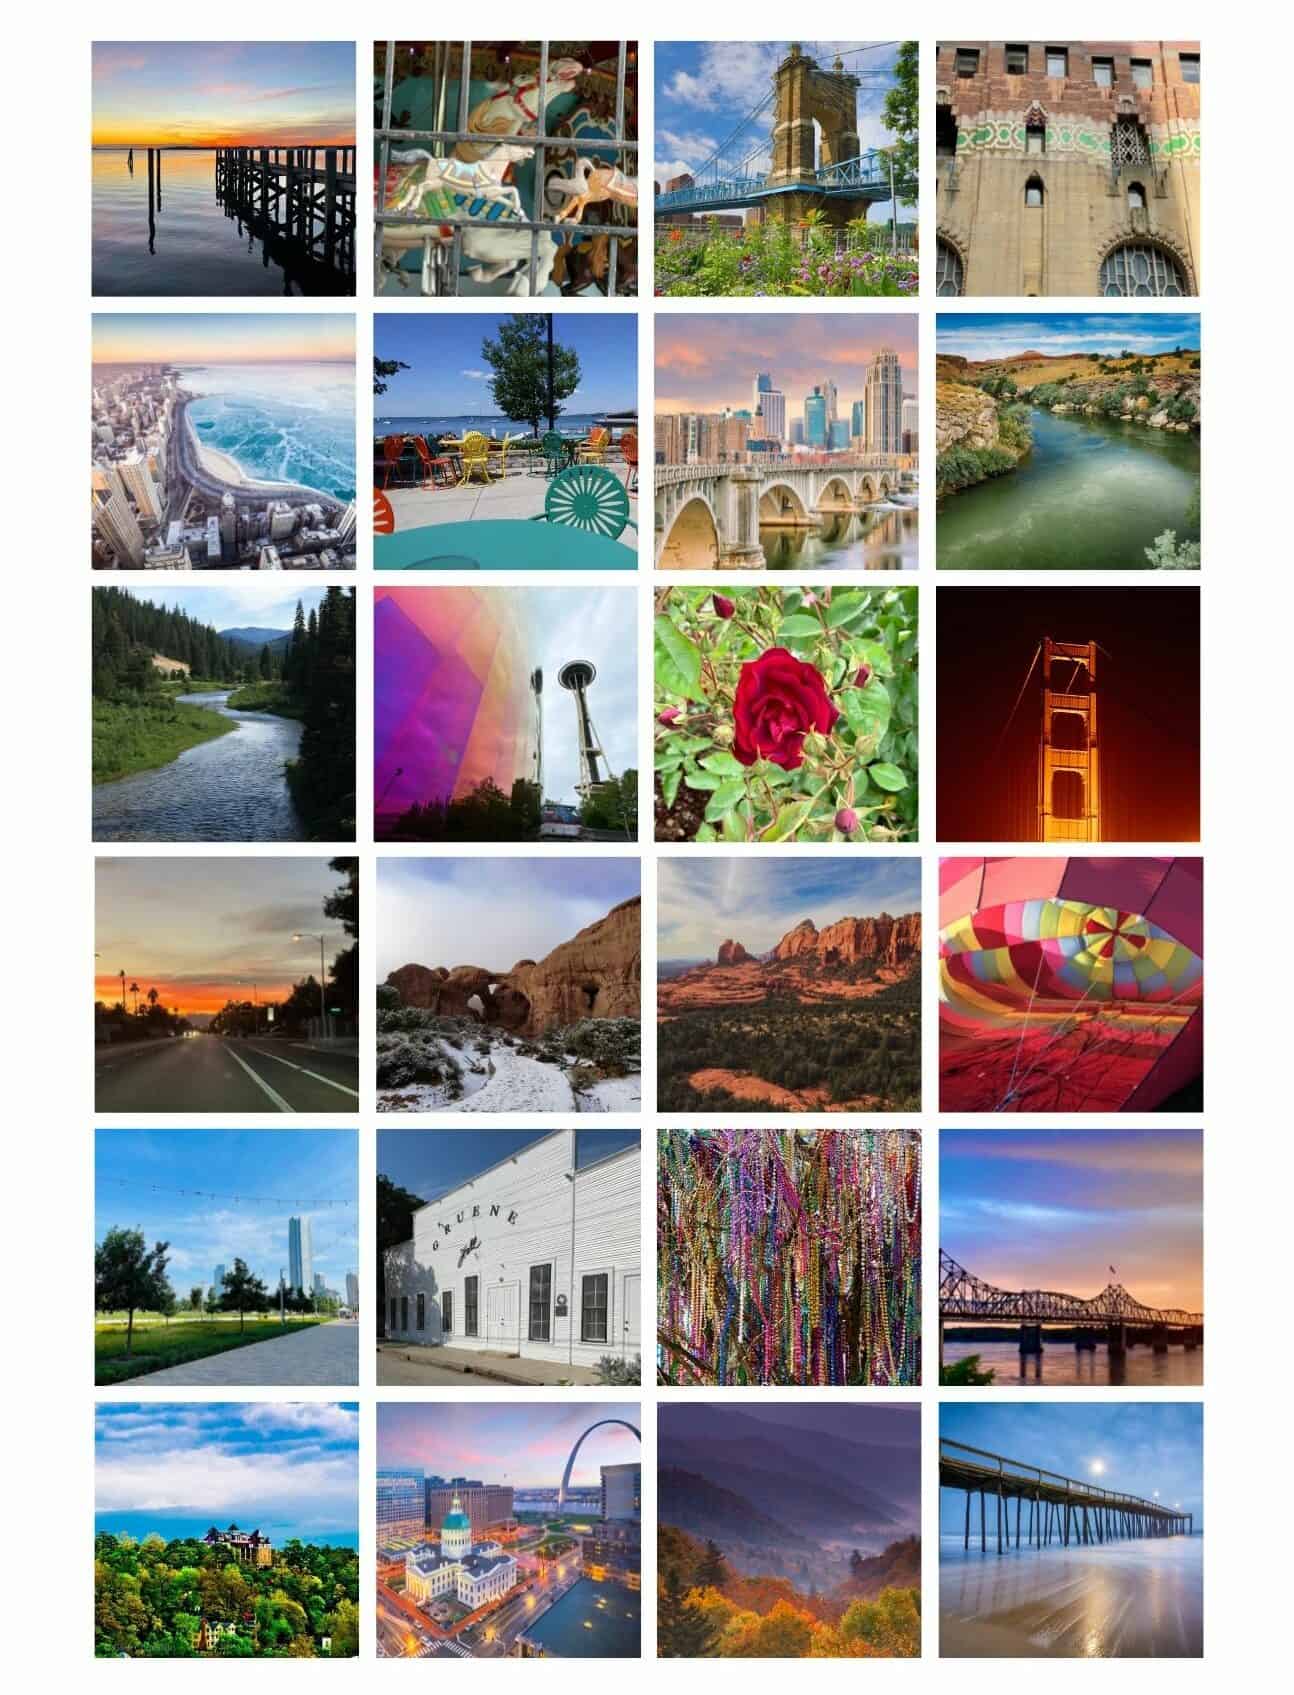 A collage of colorful place images.